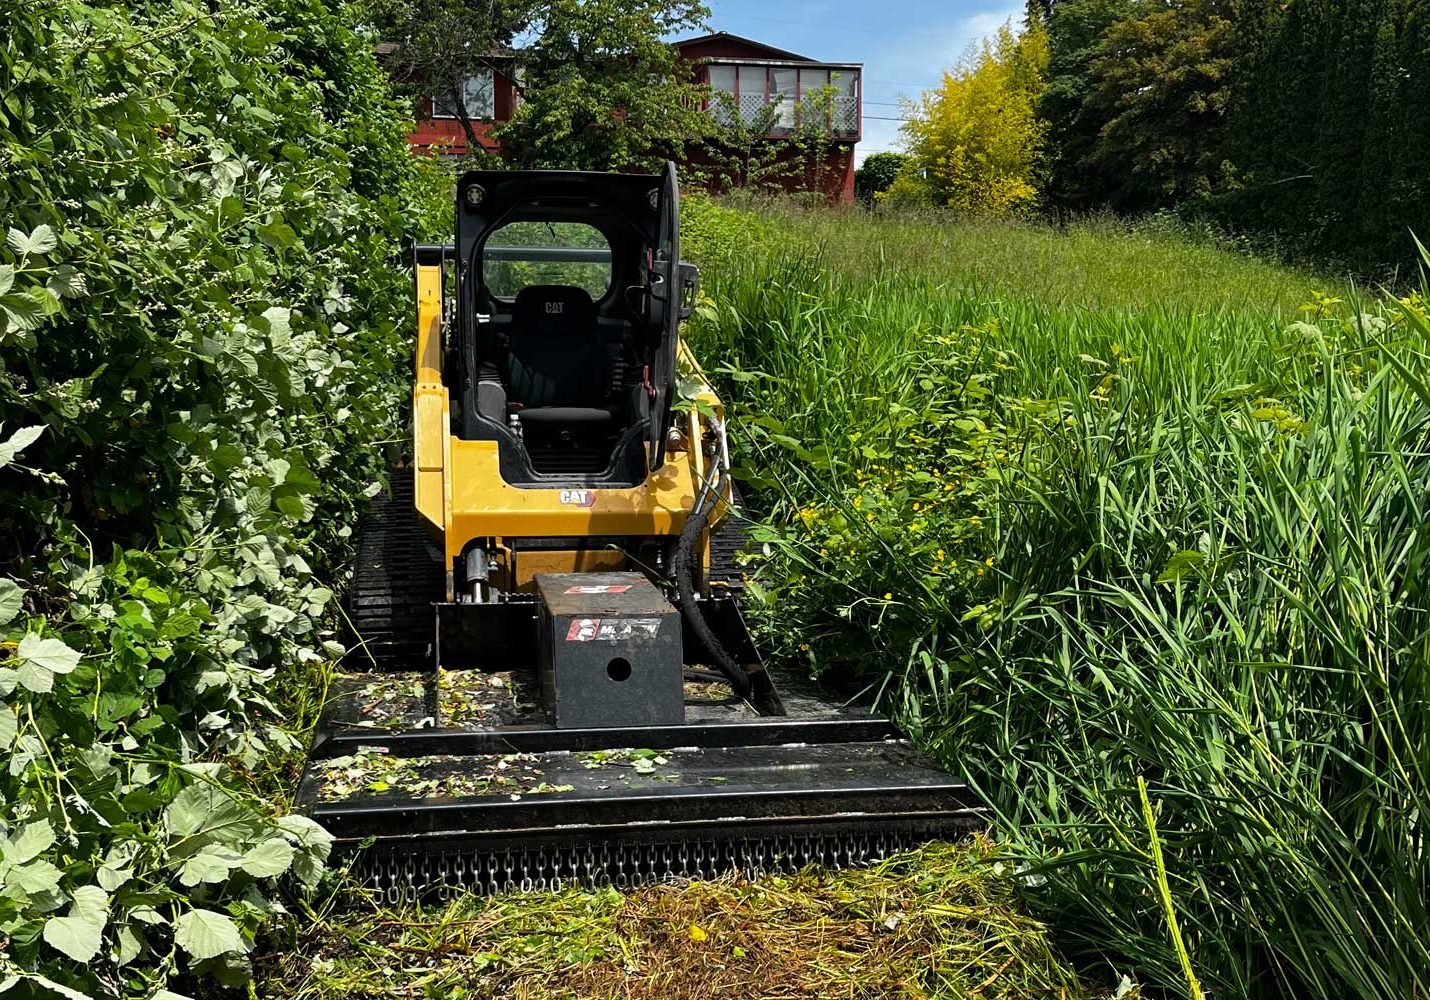 A small skid steer is parked in a grassy area.